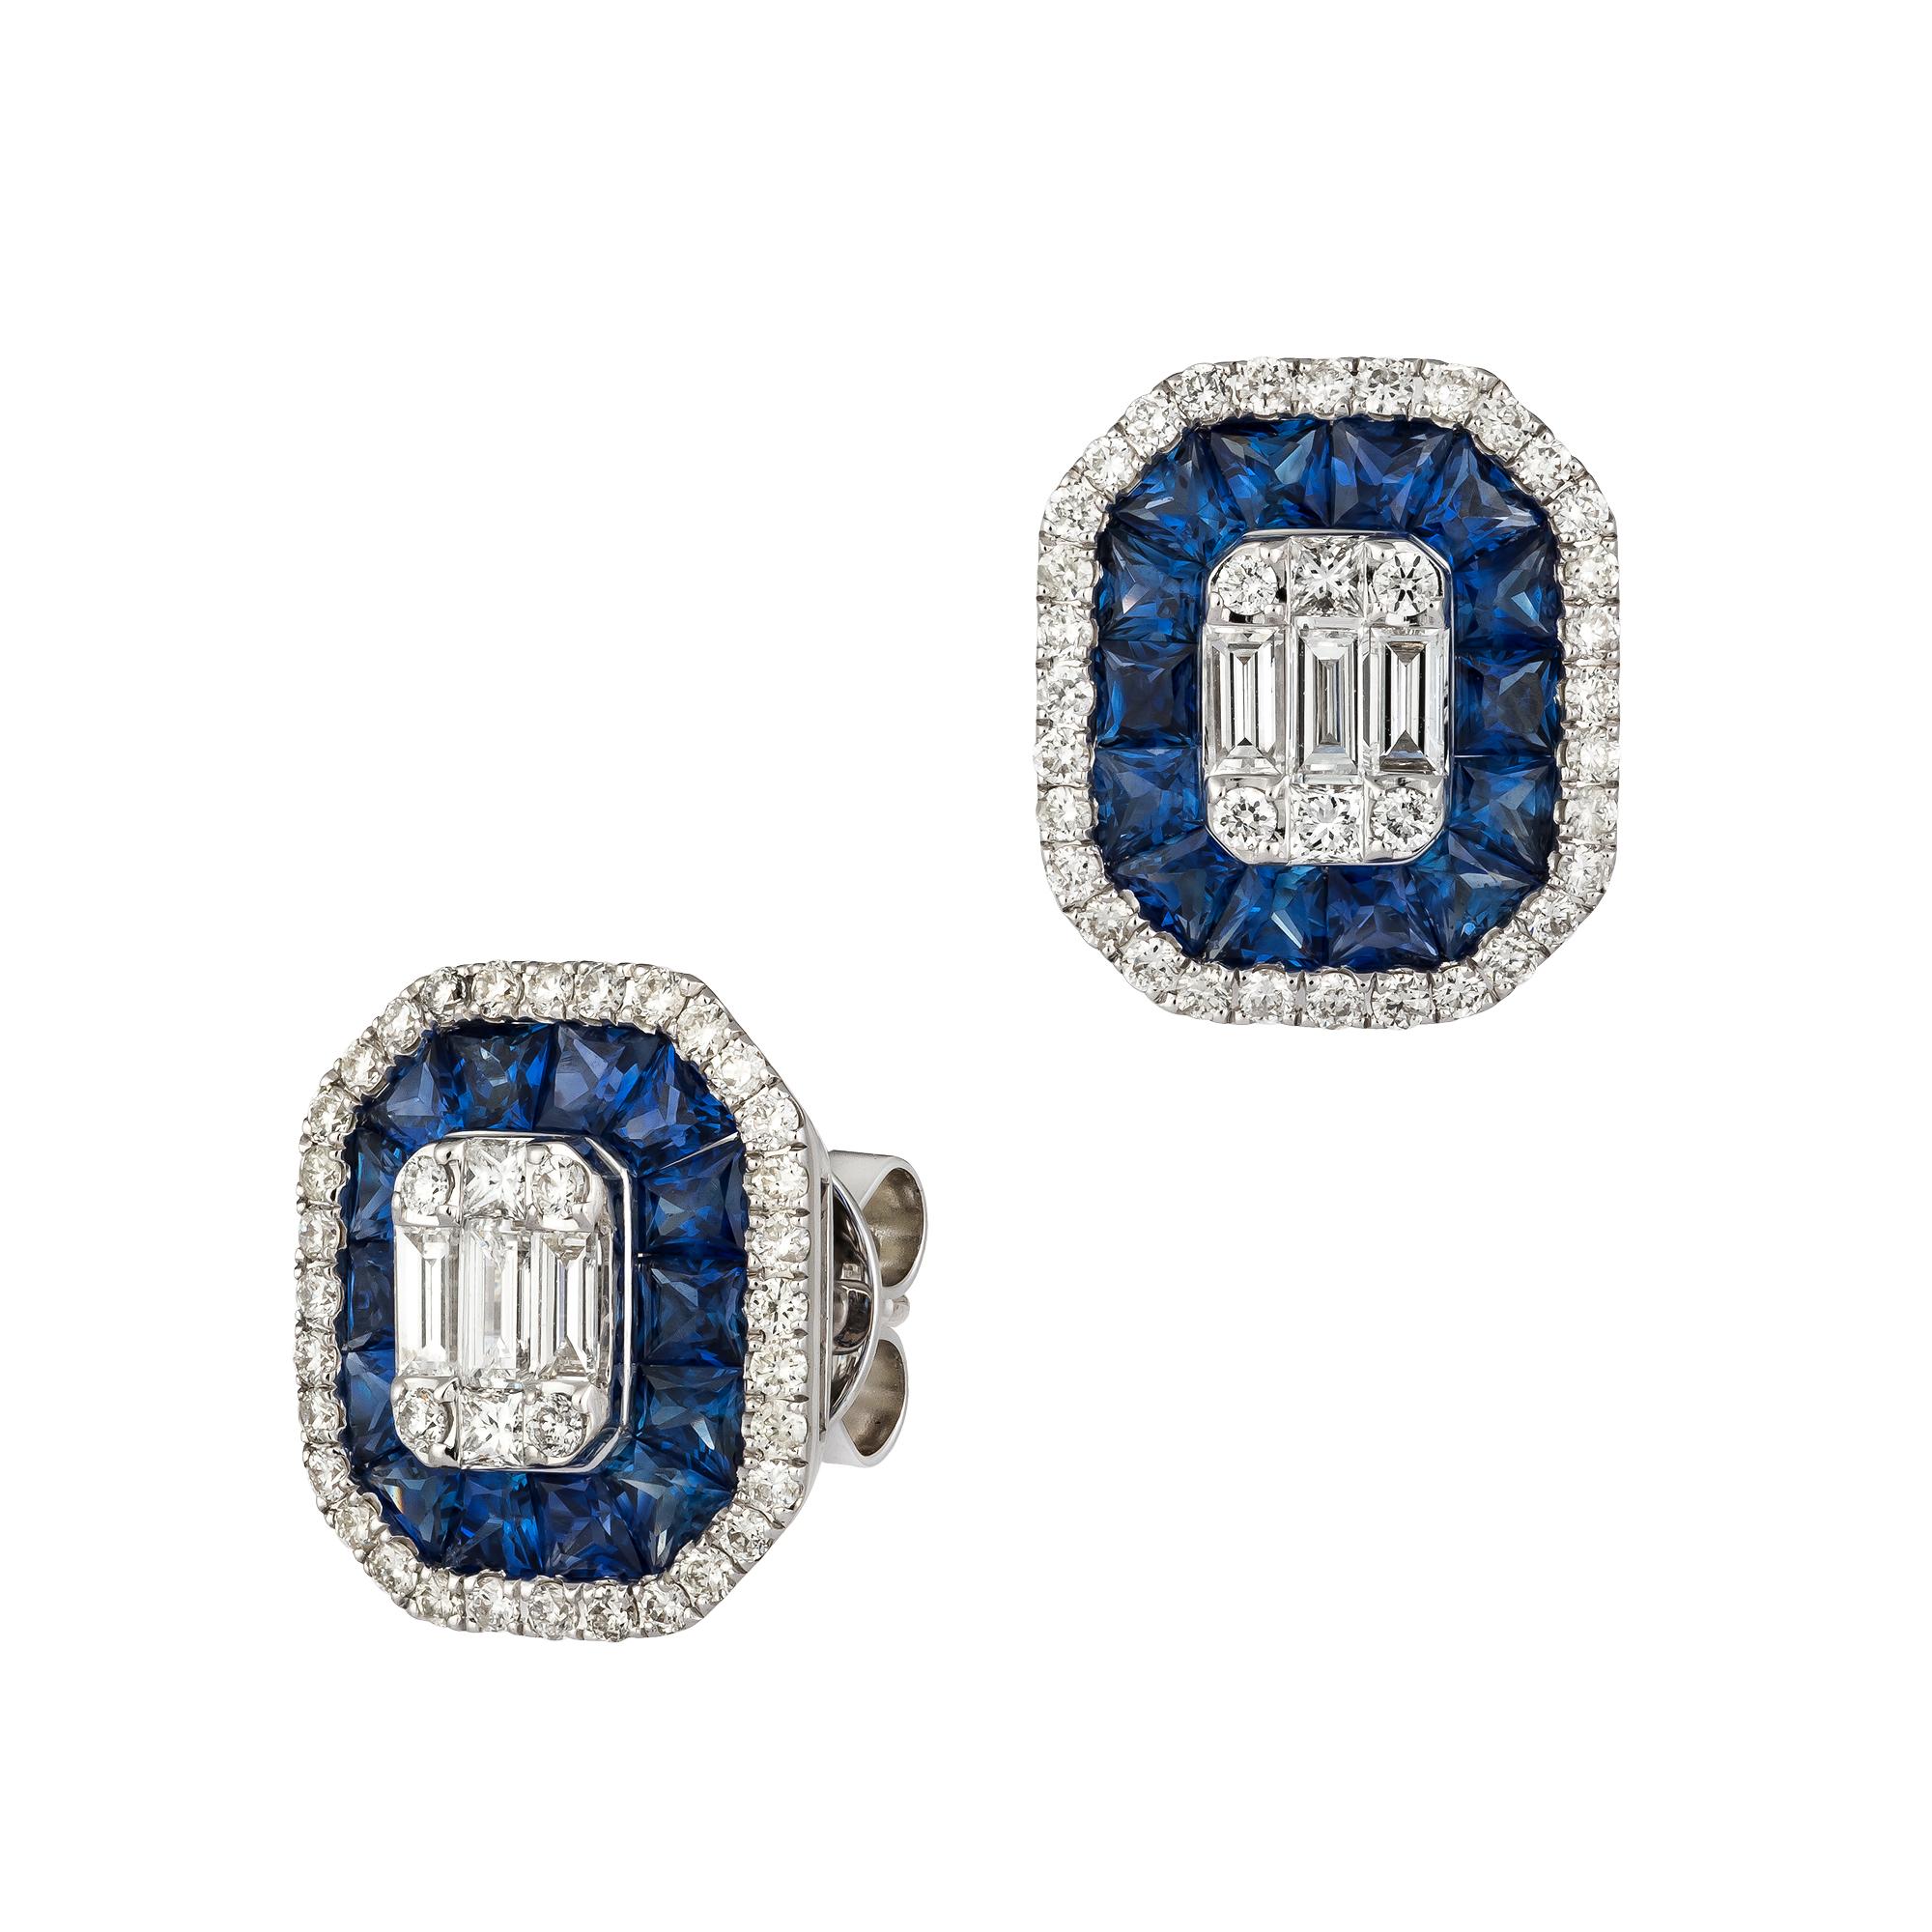 EARRING 18K White Gold Blue Sapphire 1.85 Cts/28 Pieces, D 0.44 Cts/72 Pieces , DPR 0.11 Cts/4 Pieces, TB 0.37 Cts/6 Pieces
